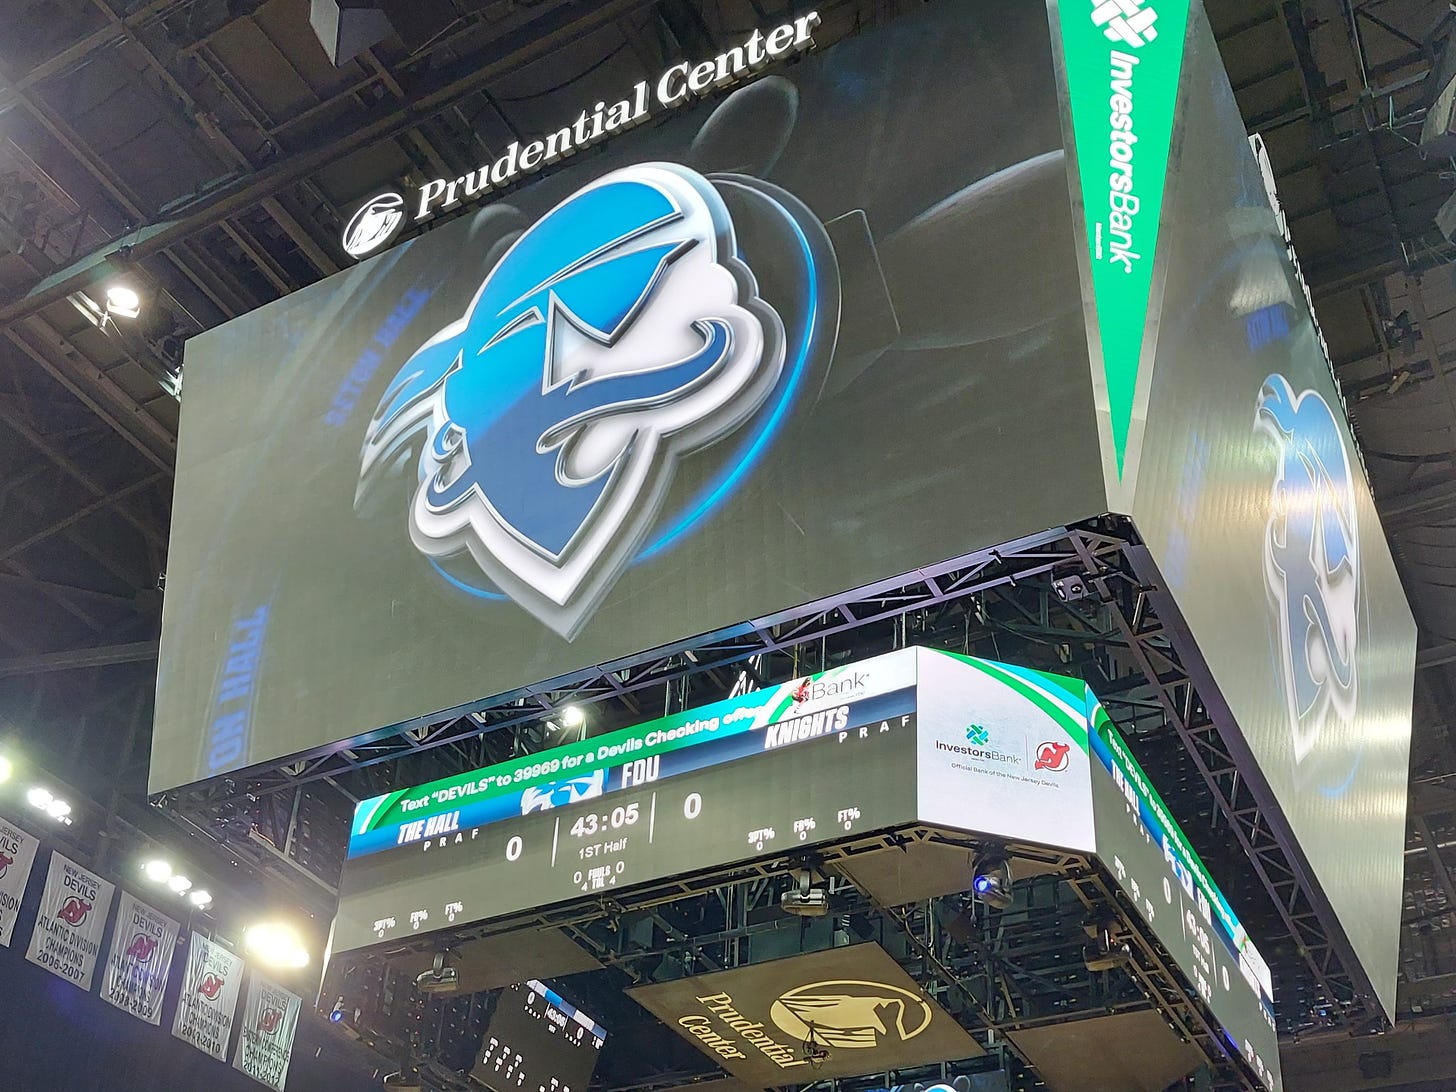 The center-hung scoreboard at Prudential Center before Seton Hall’s 2021-22 season opener against FDU on Nov. 10, 2021. (Photo by Adam Zielonka)